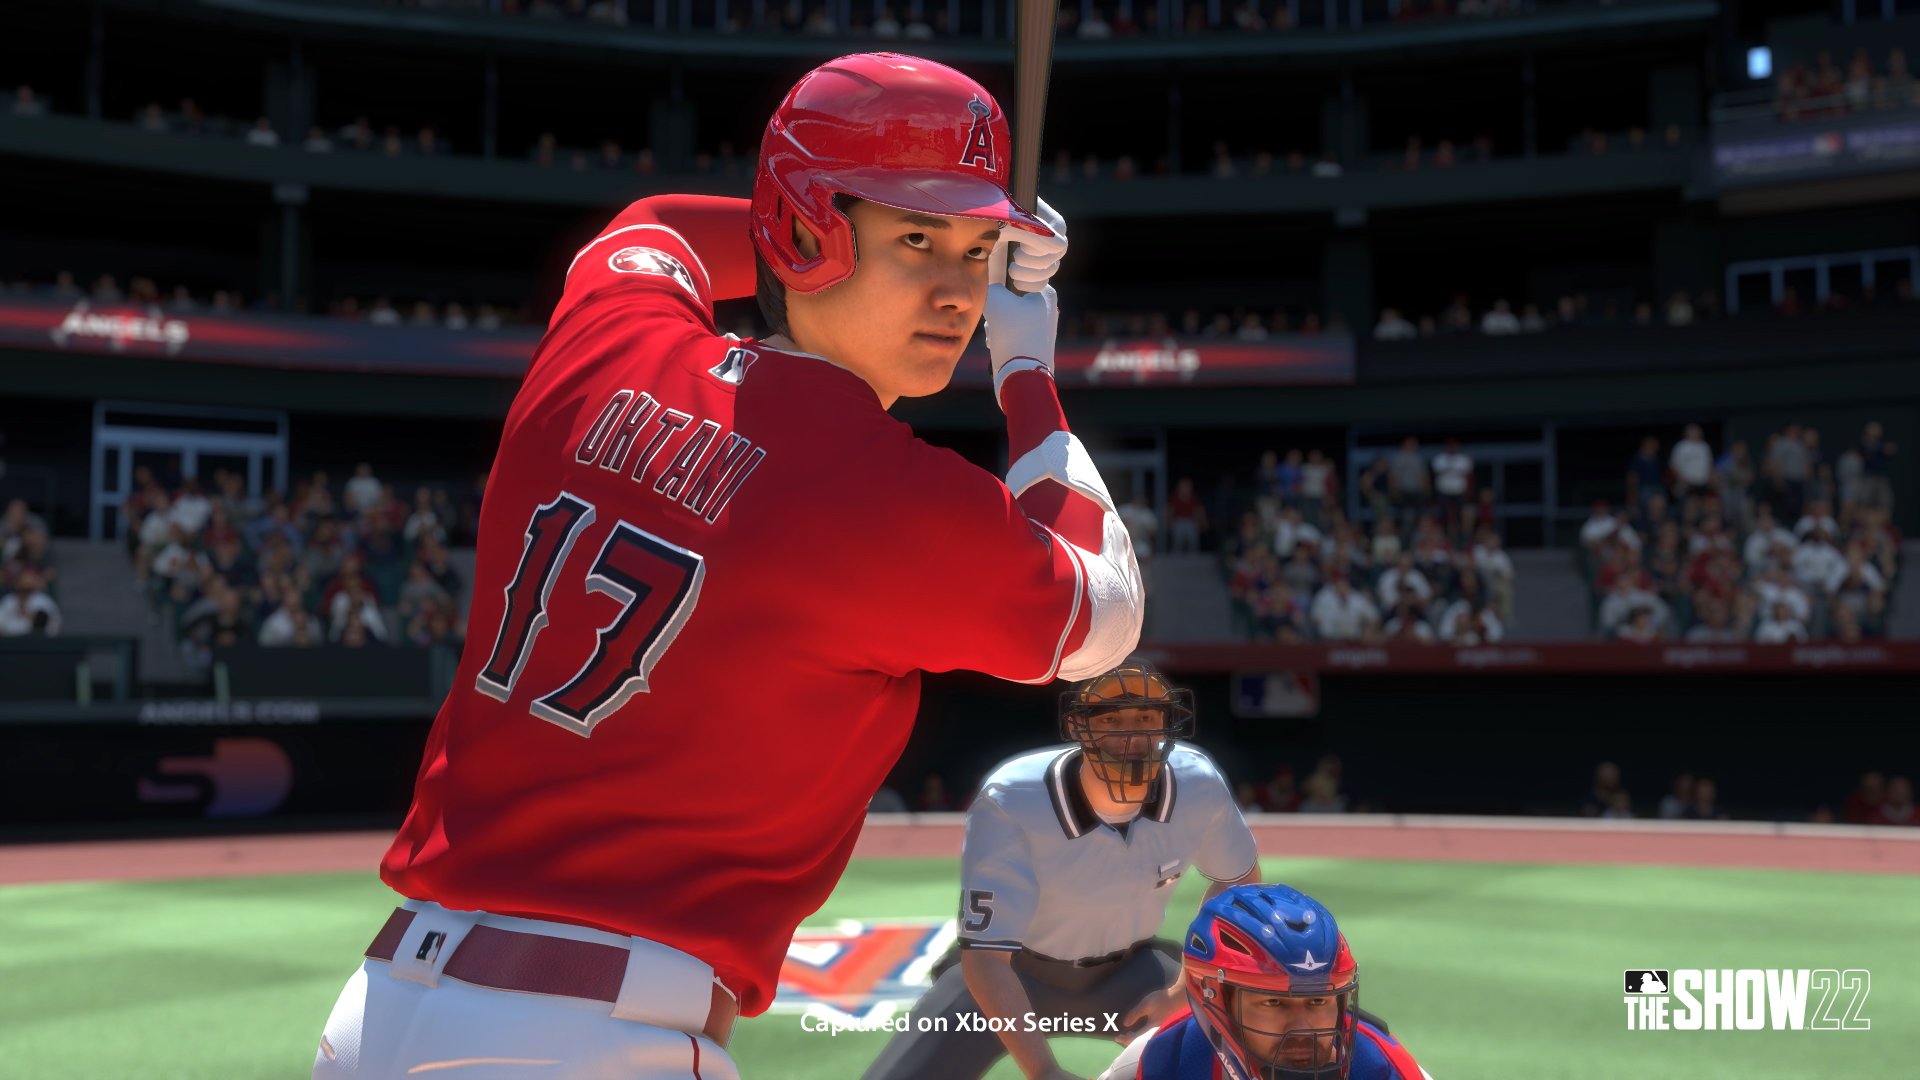 MLB The Show 22 - MVP Edition – April 1 - Optimized for Xbox Series X